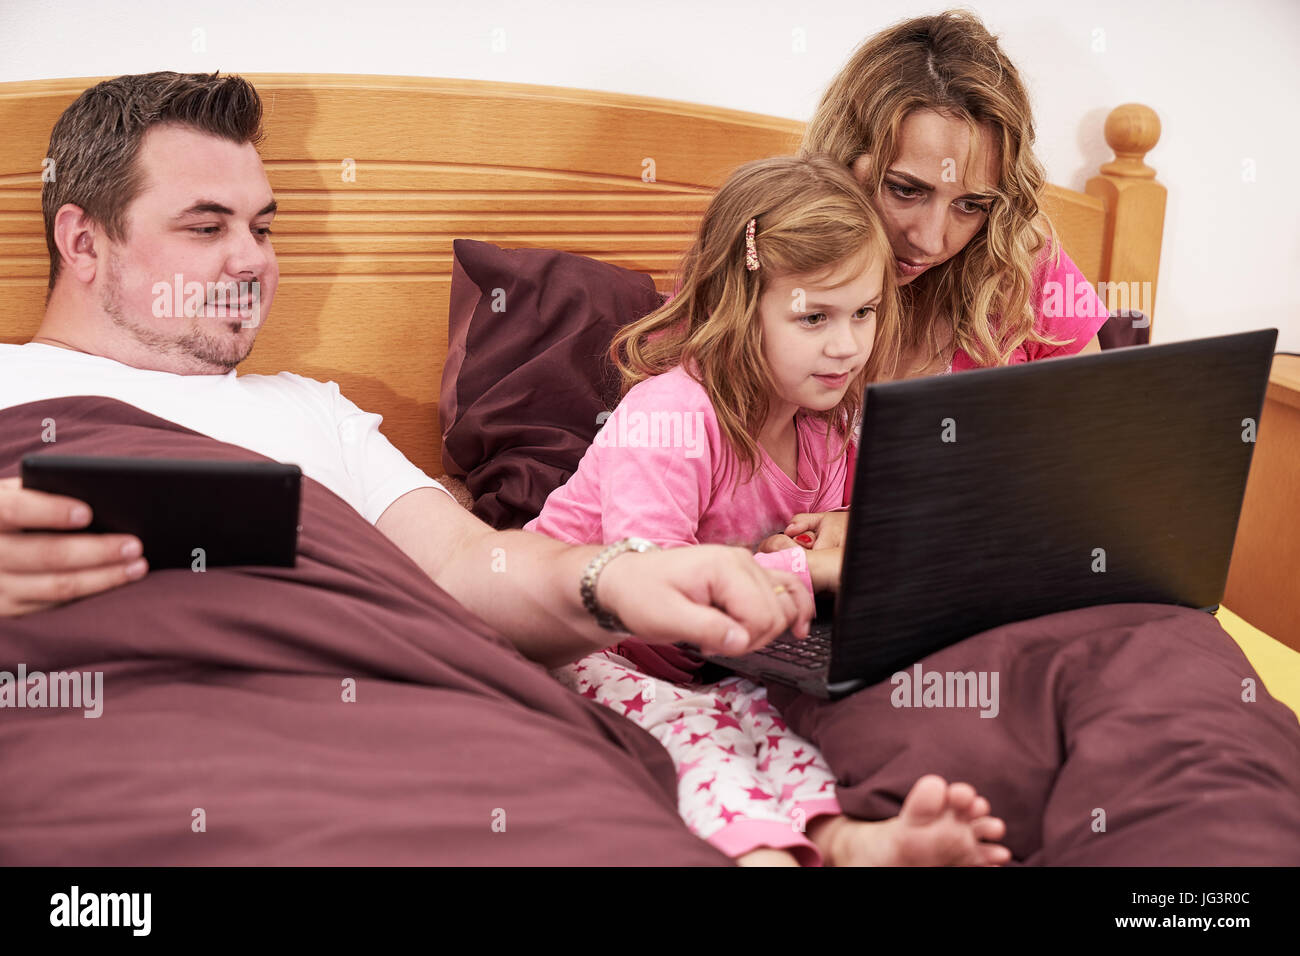 Family using electronical devices Stock Photo